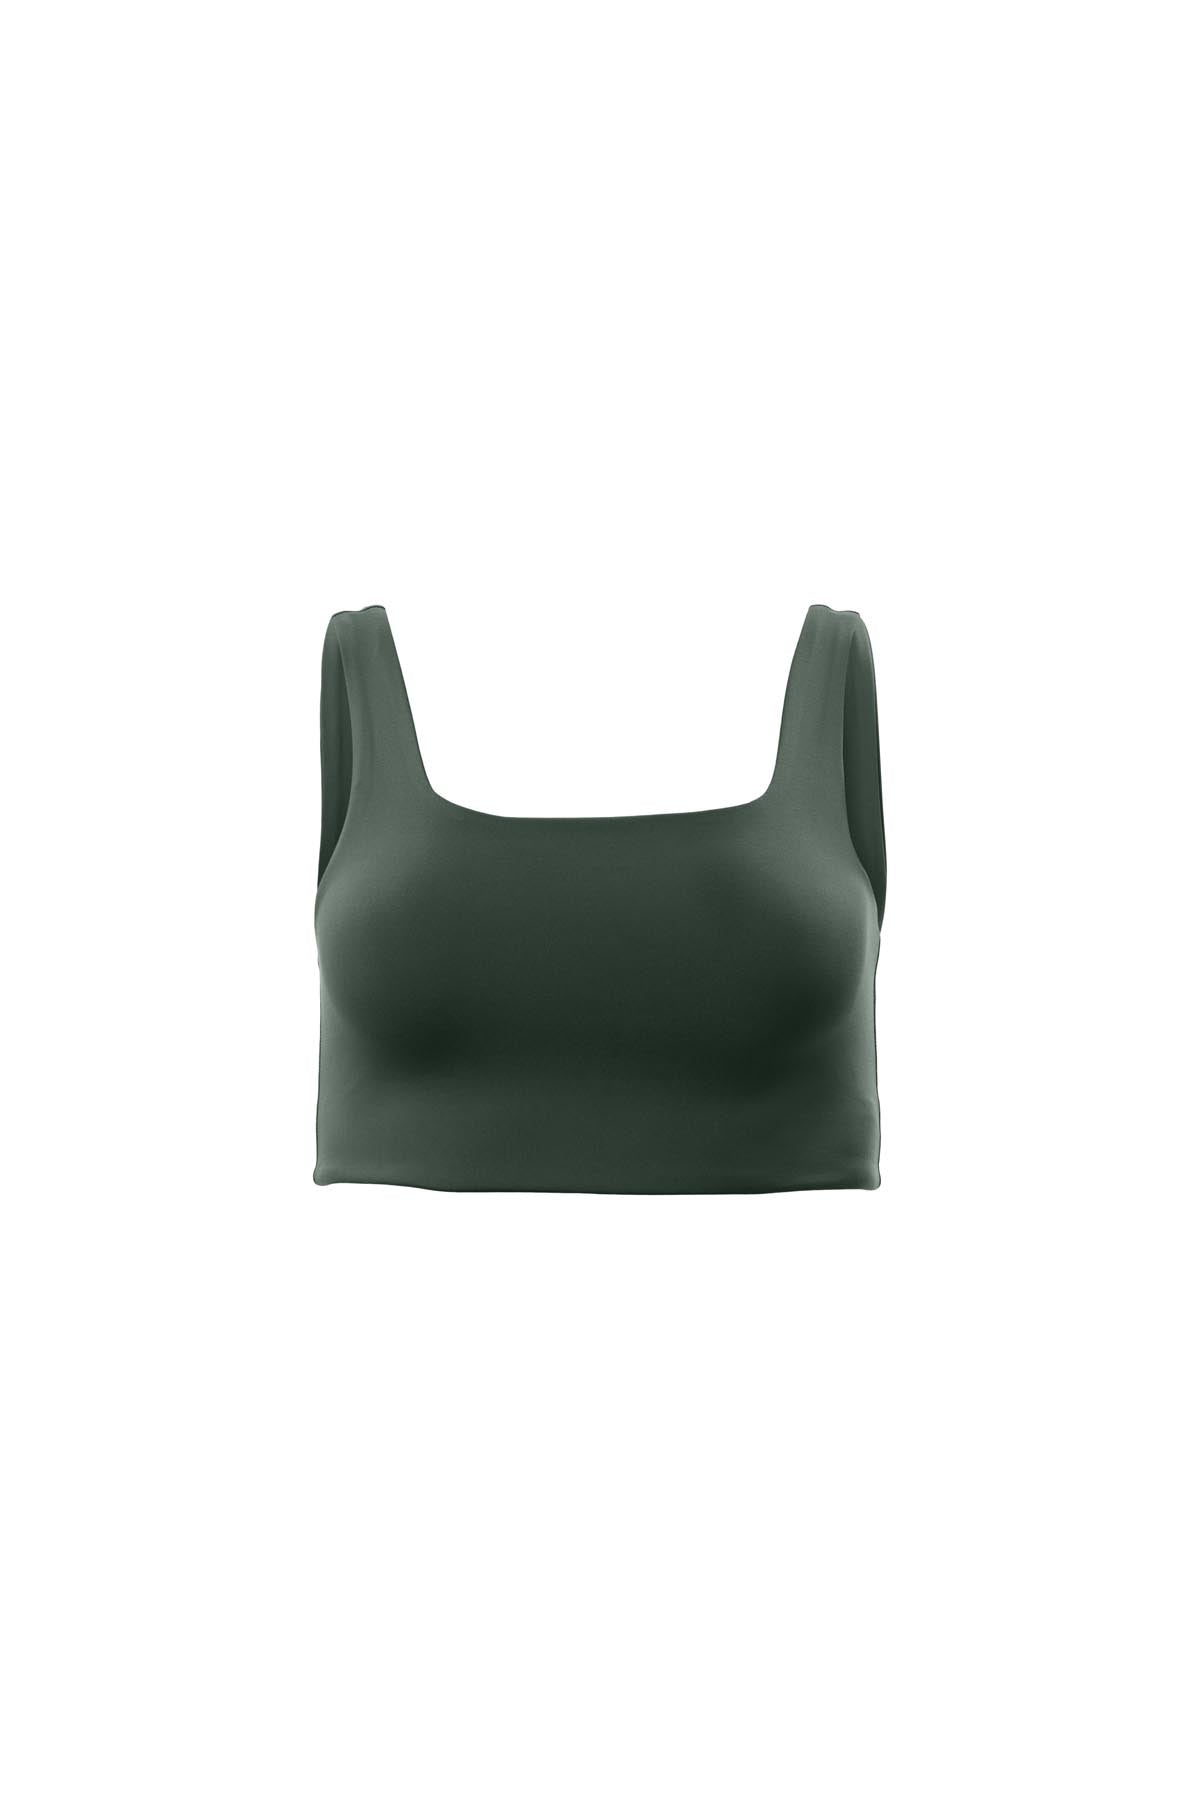 Girlfriend Collective blue RIB Tommy Cropped Bra Size XS - $10 (79% Off  Retail) - From carson